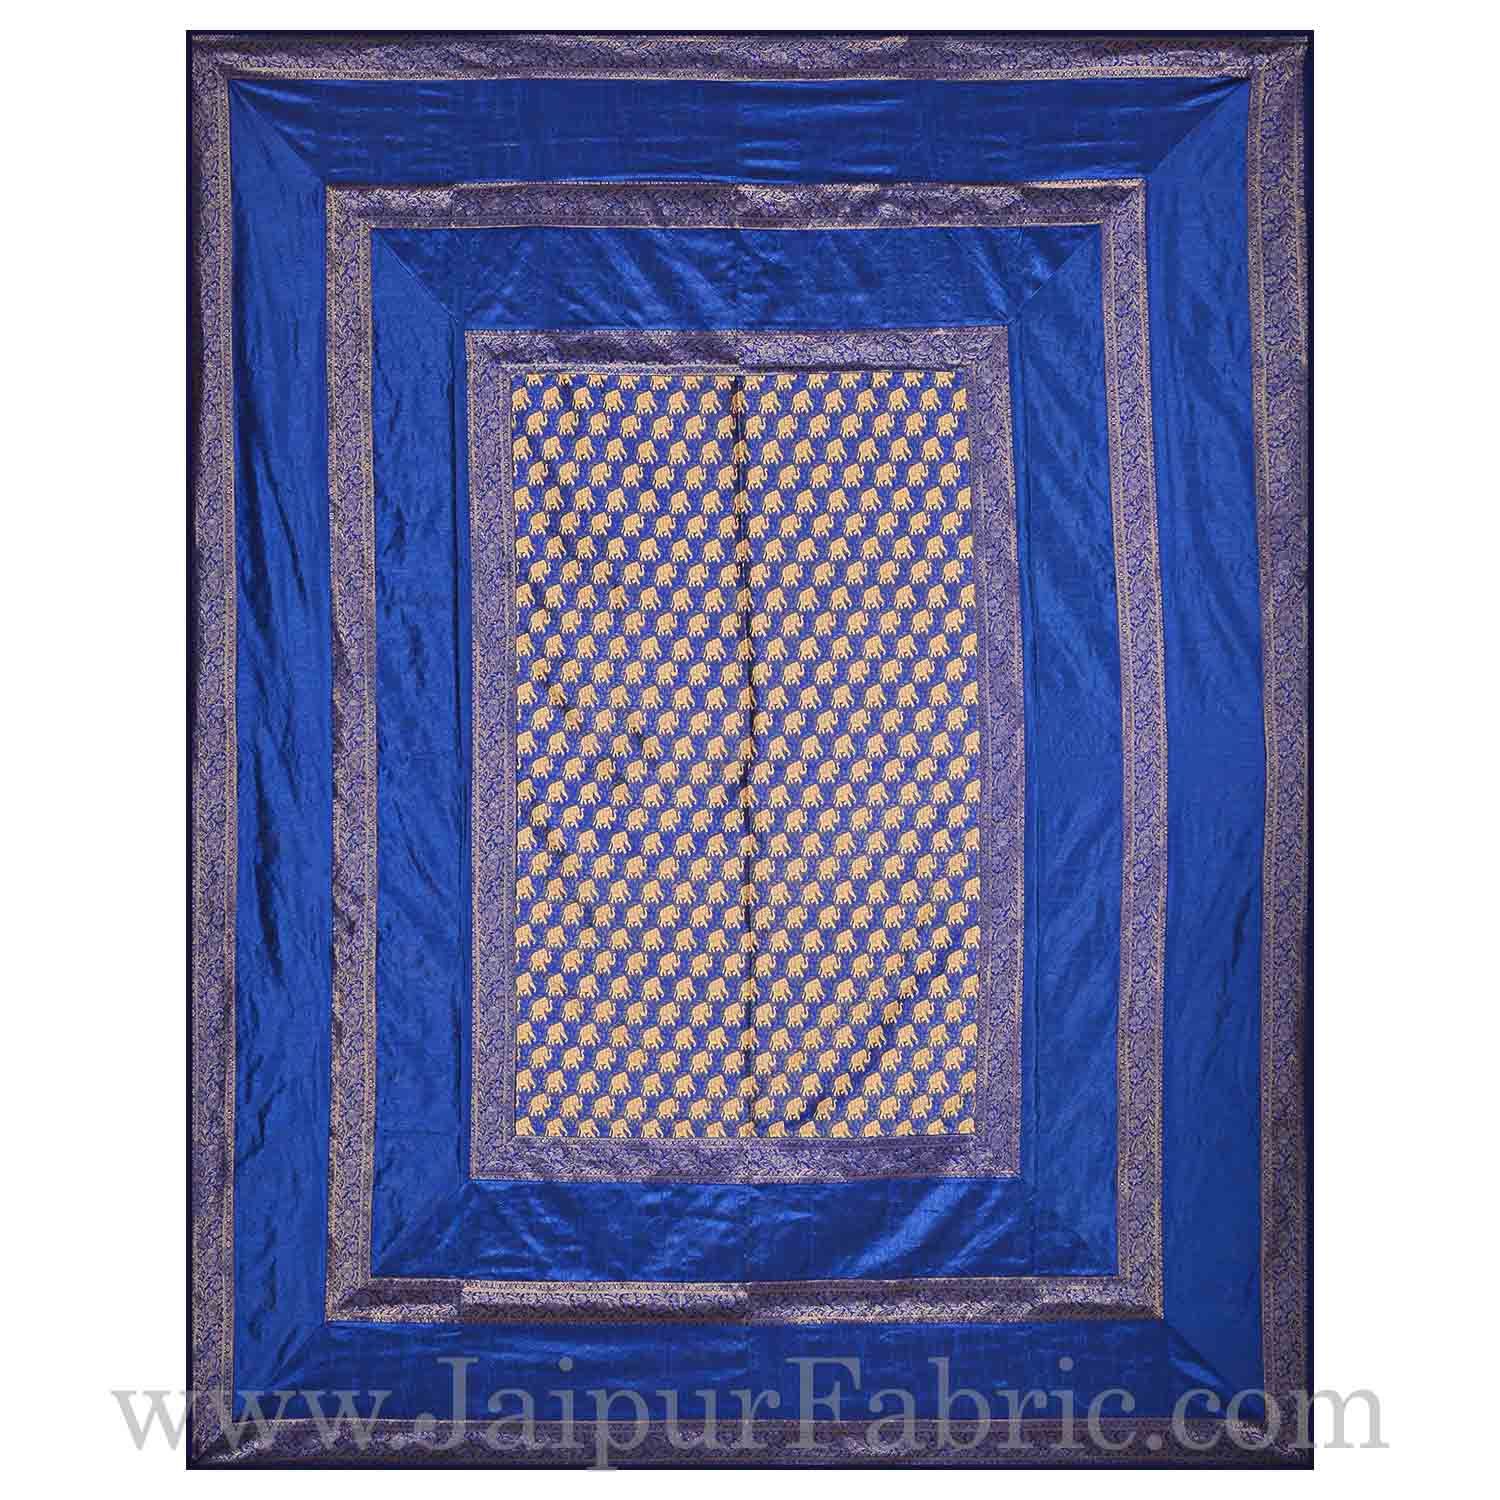 Blue Rajasthani Zari Embroidered Lace Elephant Thread Work Silk Double Bed Sheet